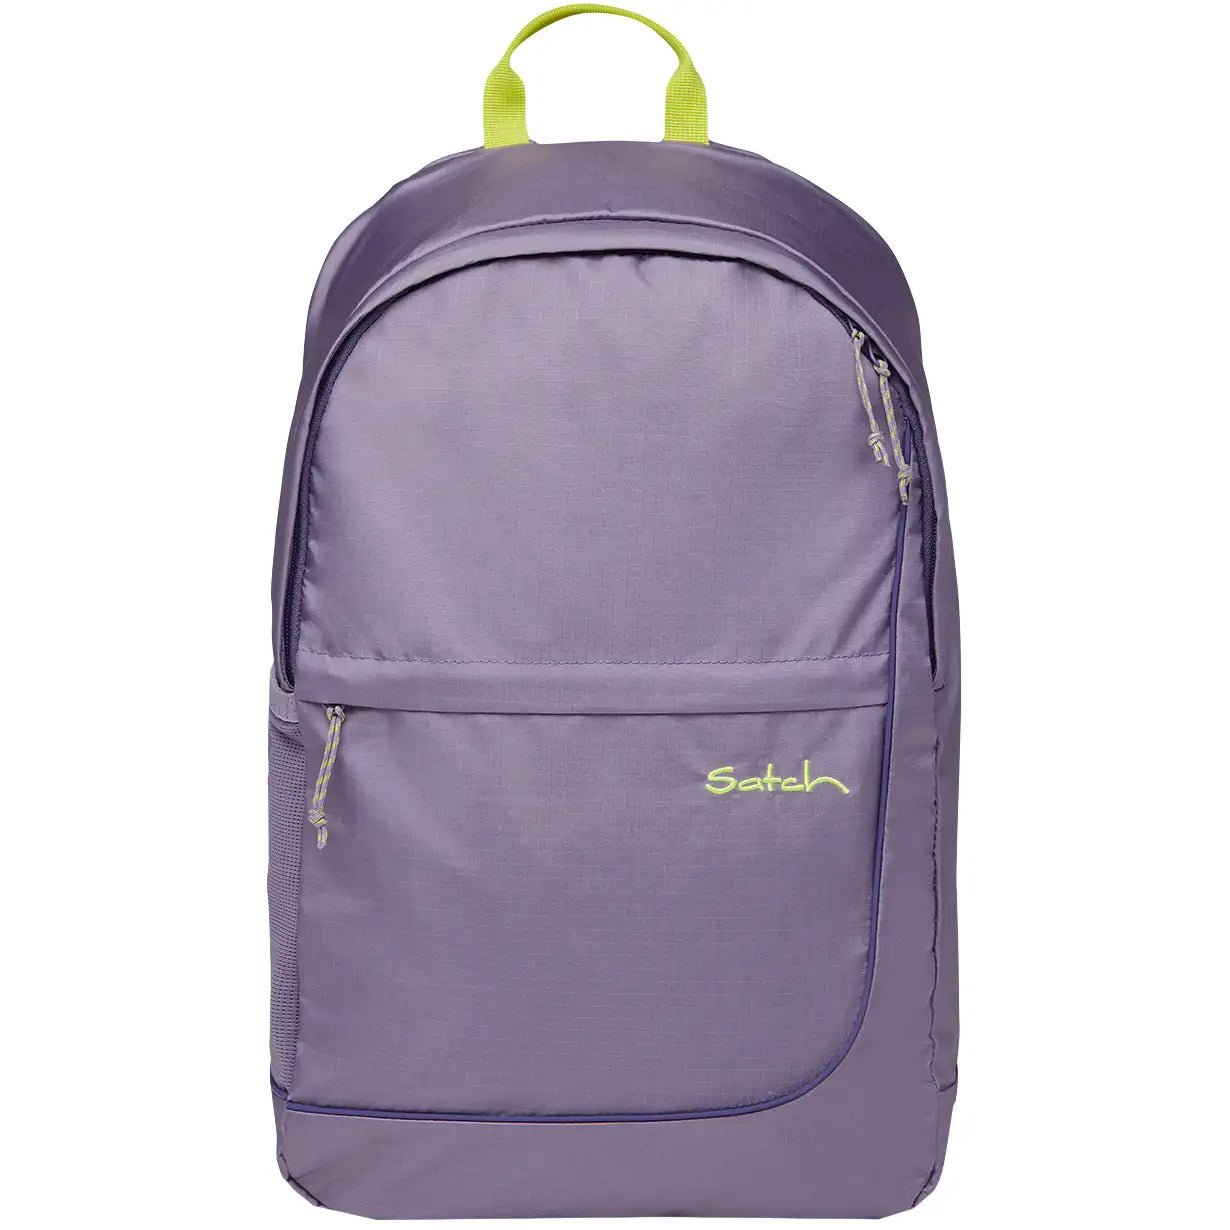 Sac à dos loisirs Satch Fly 45 cm - Ripstop Violet